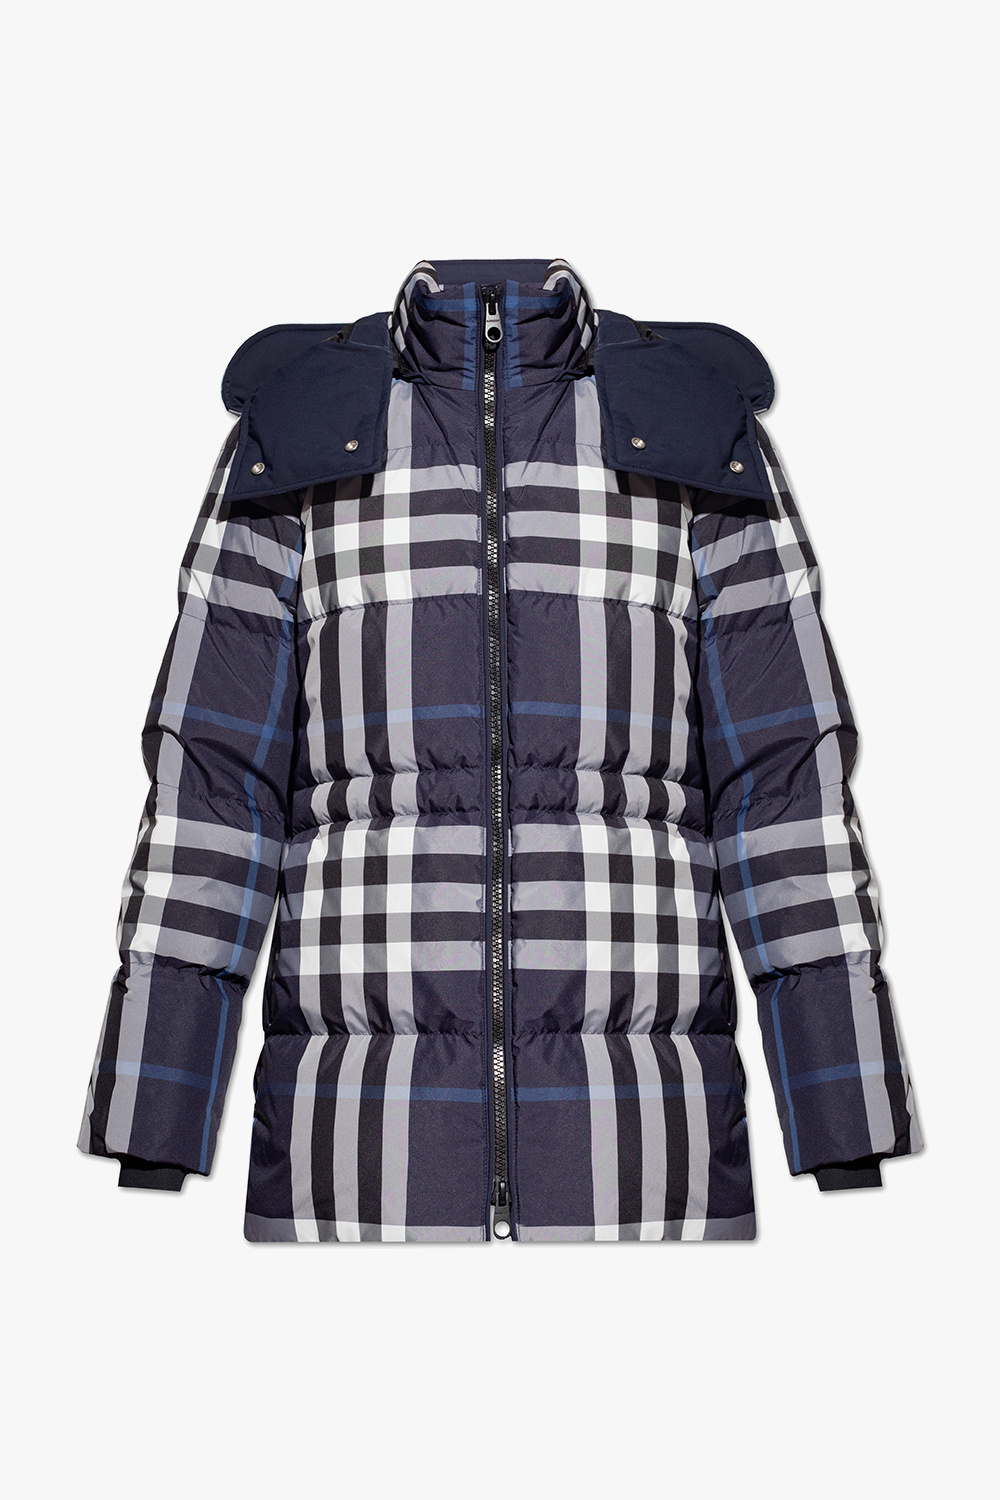 Burberry ‘Bewerly’ textured jacket